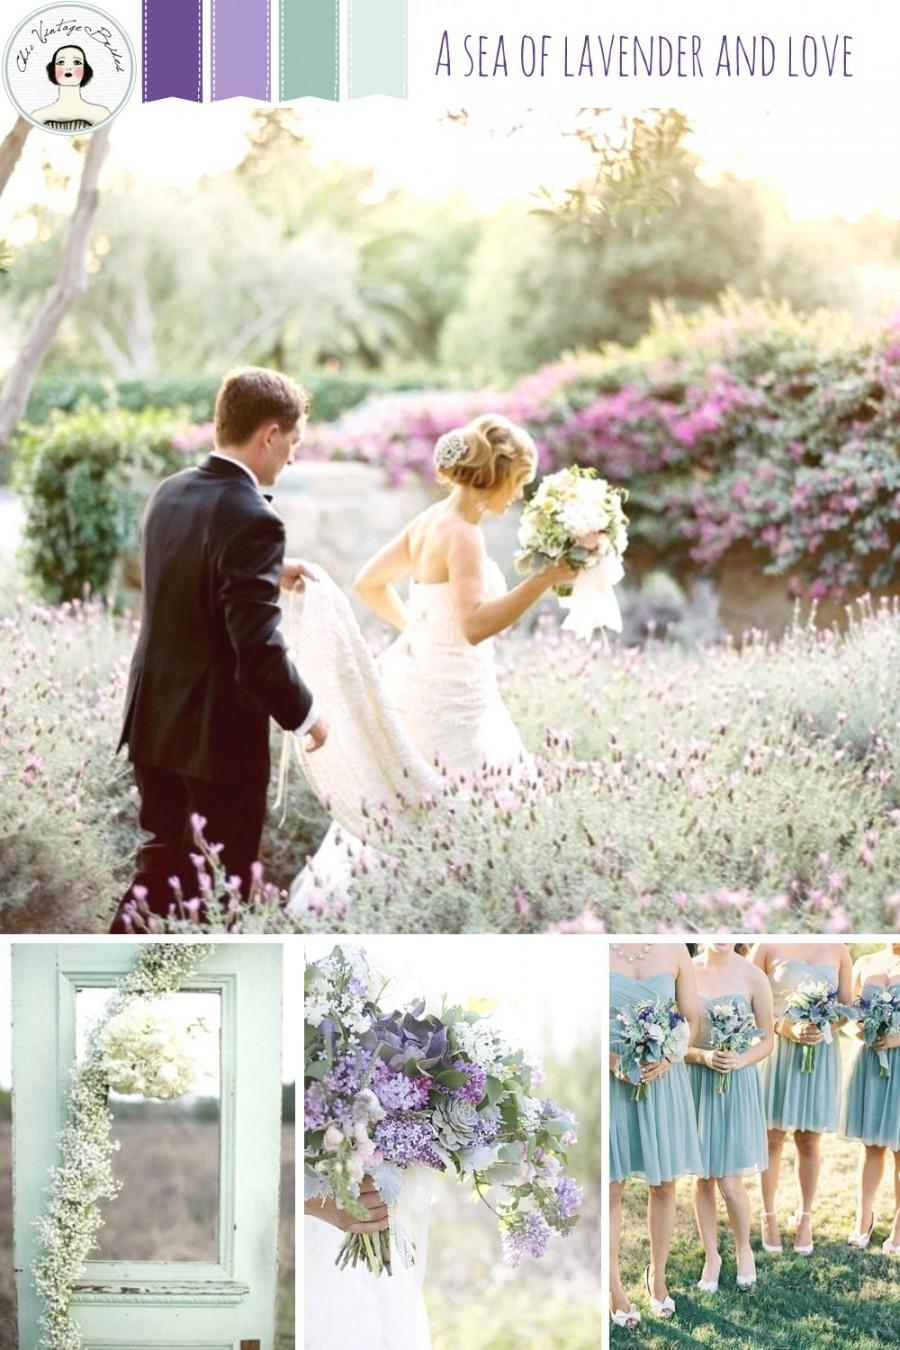 Свадьба - A Sea of Lavender and Love - Romantic Wedding Inspiration in Shades of Lavender and Seafoam